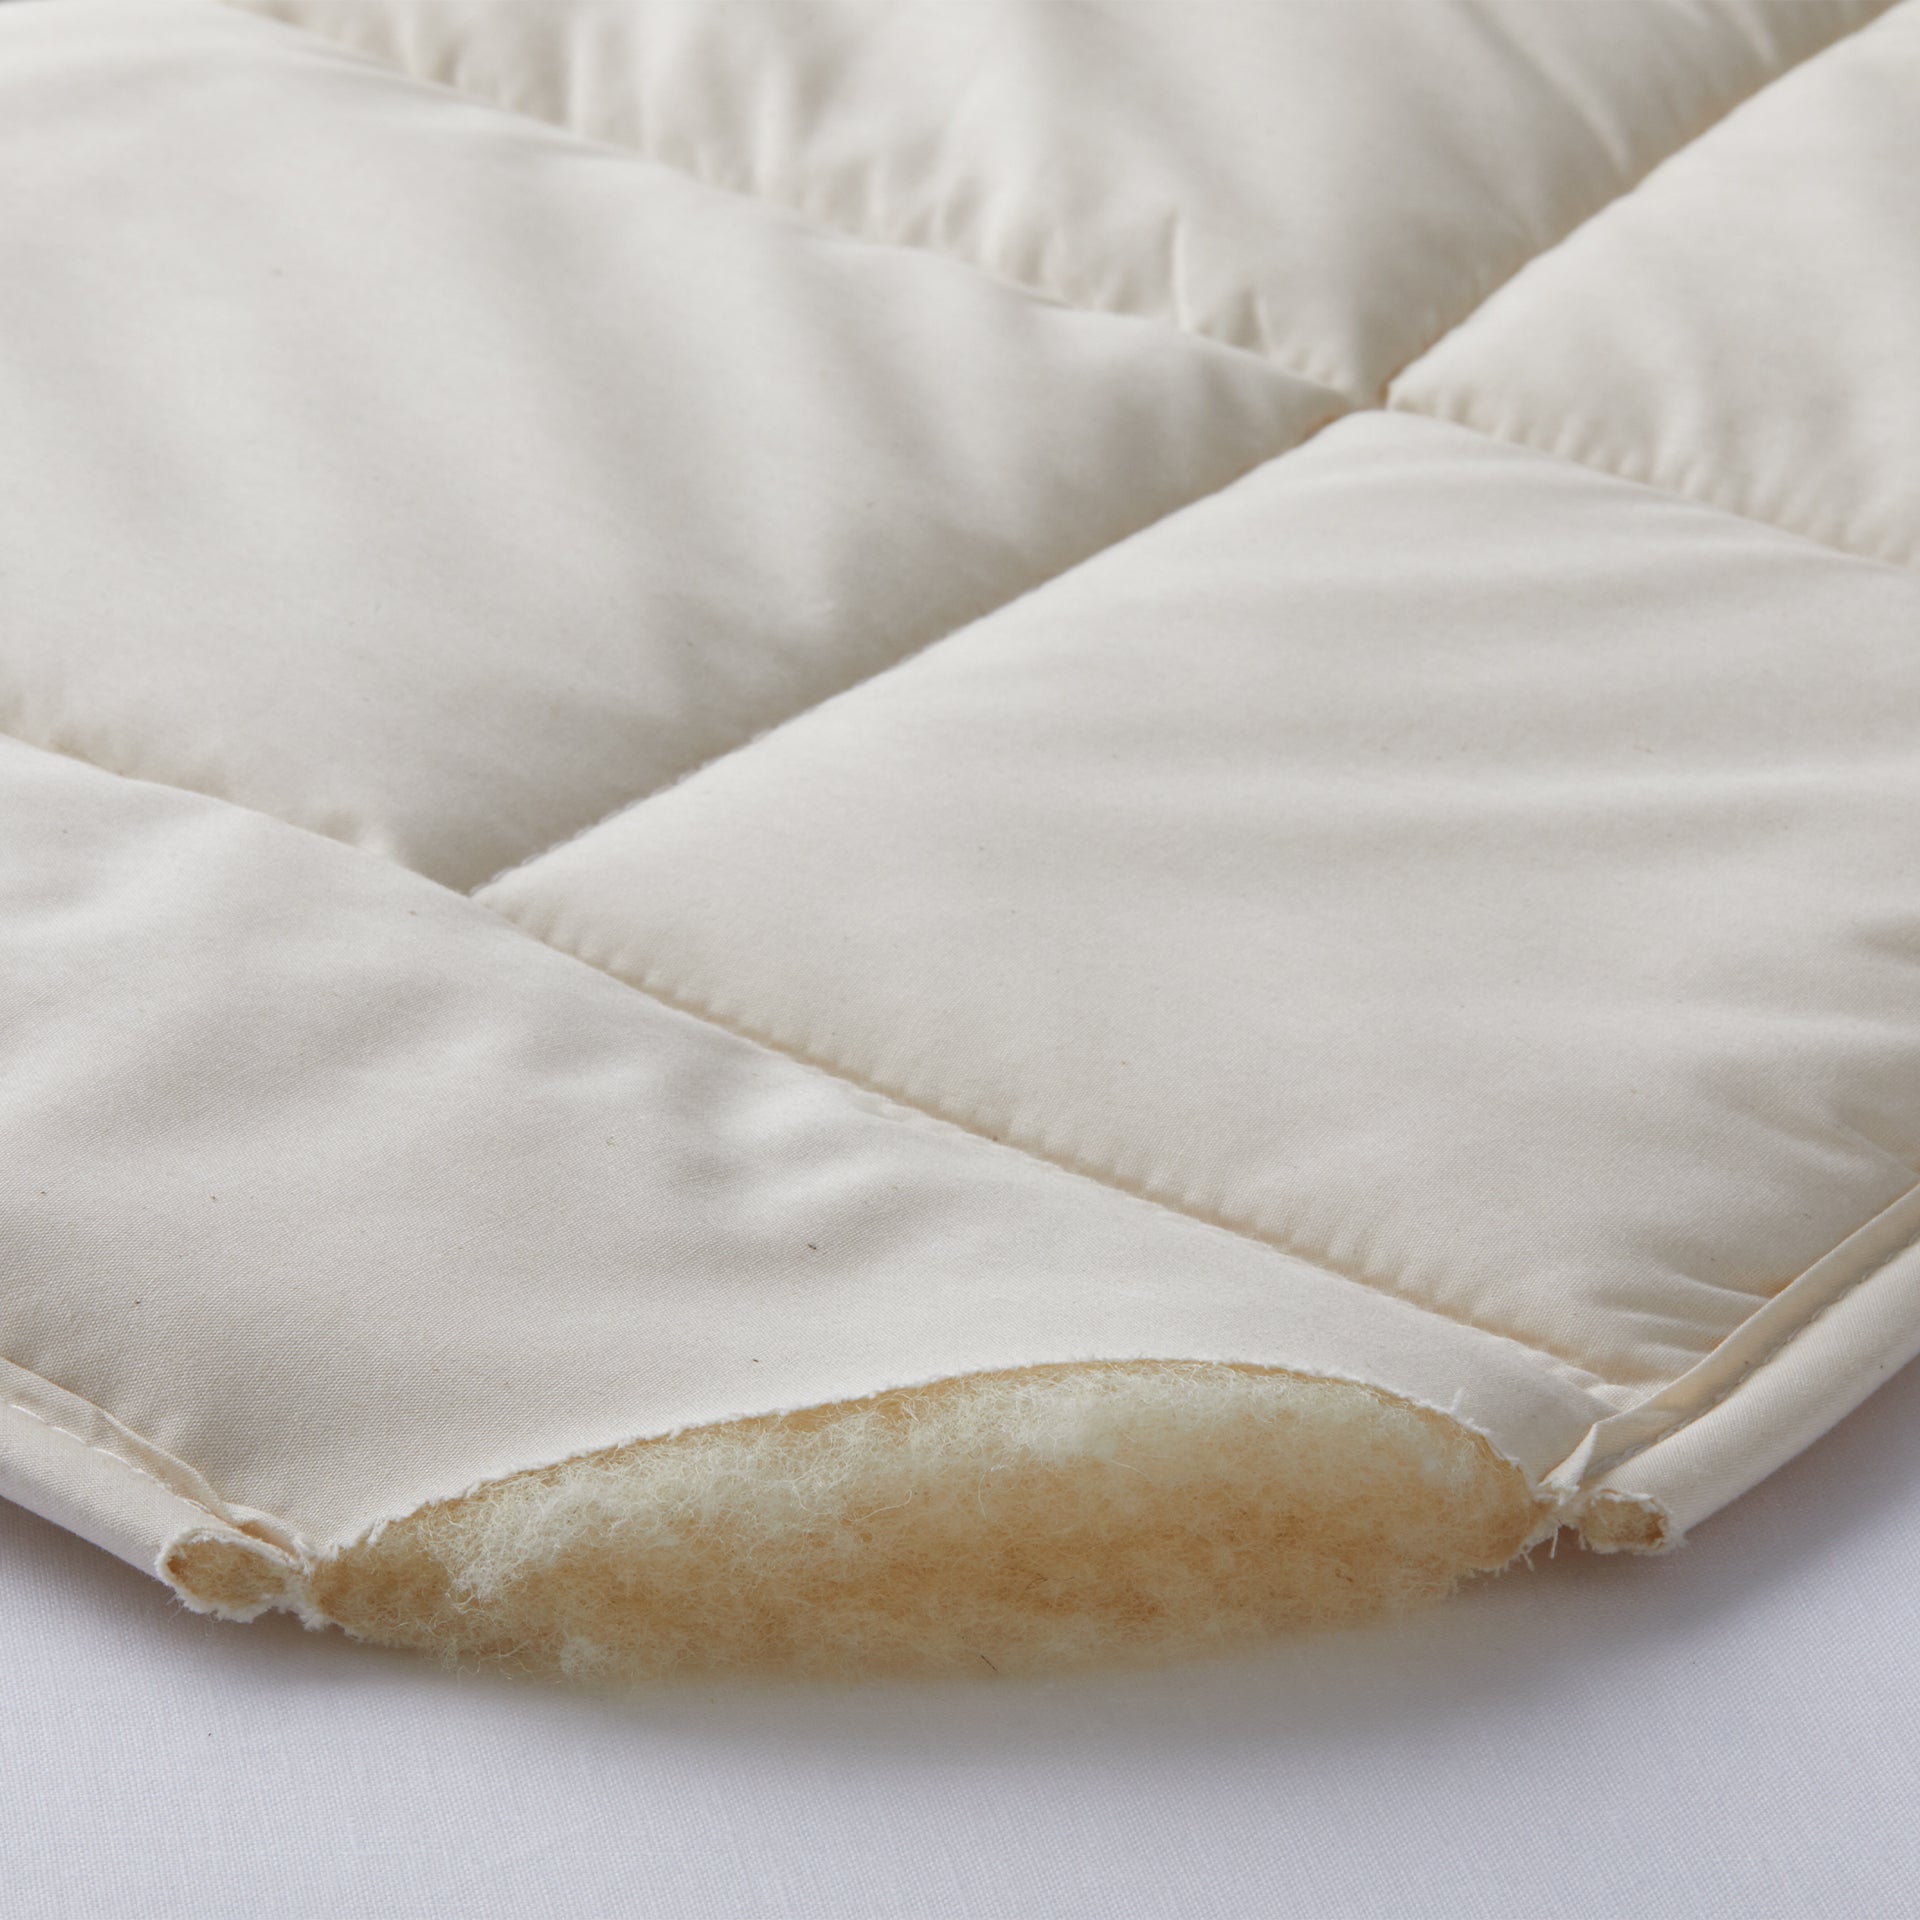 detail of the bio wool mattress pad of 100% merino pure wool inside and 100% cotton pad fabric outside